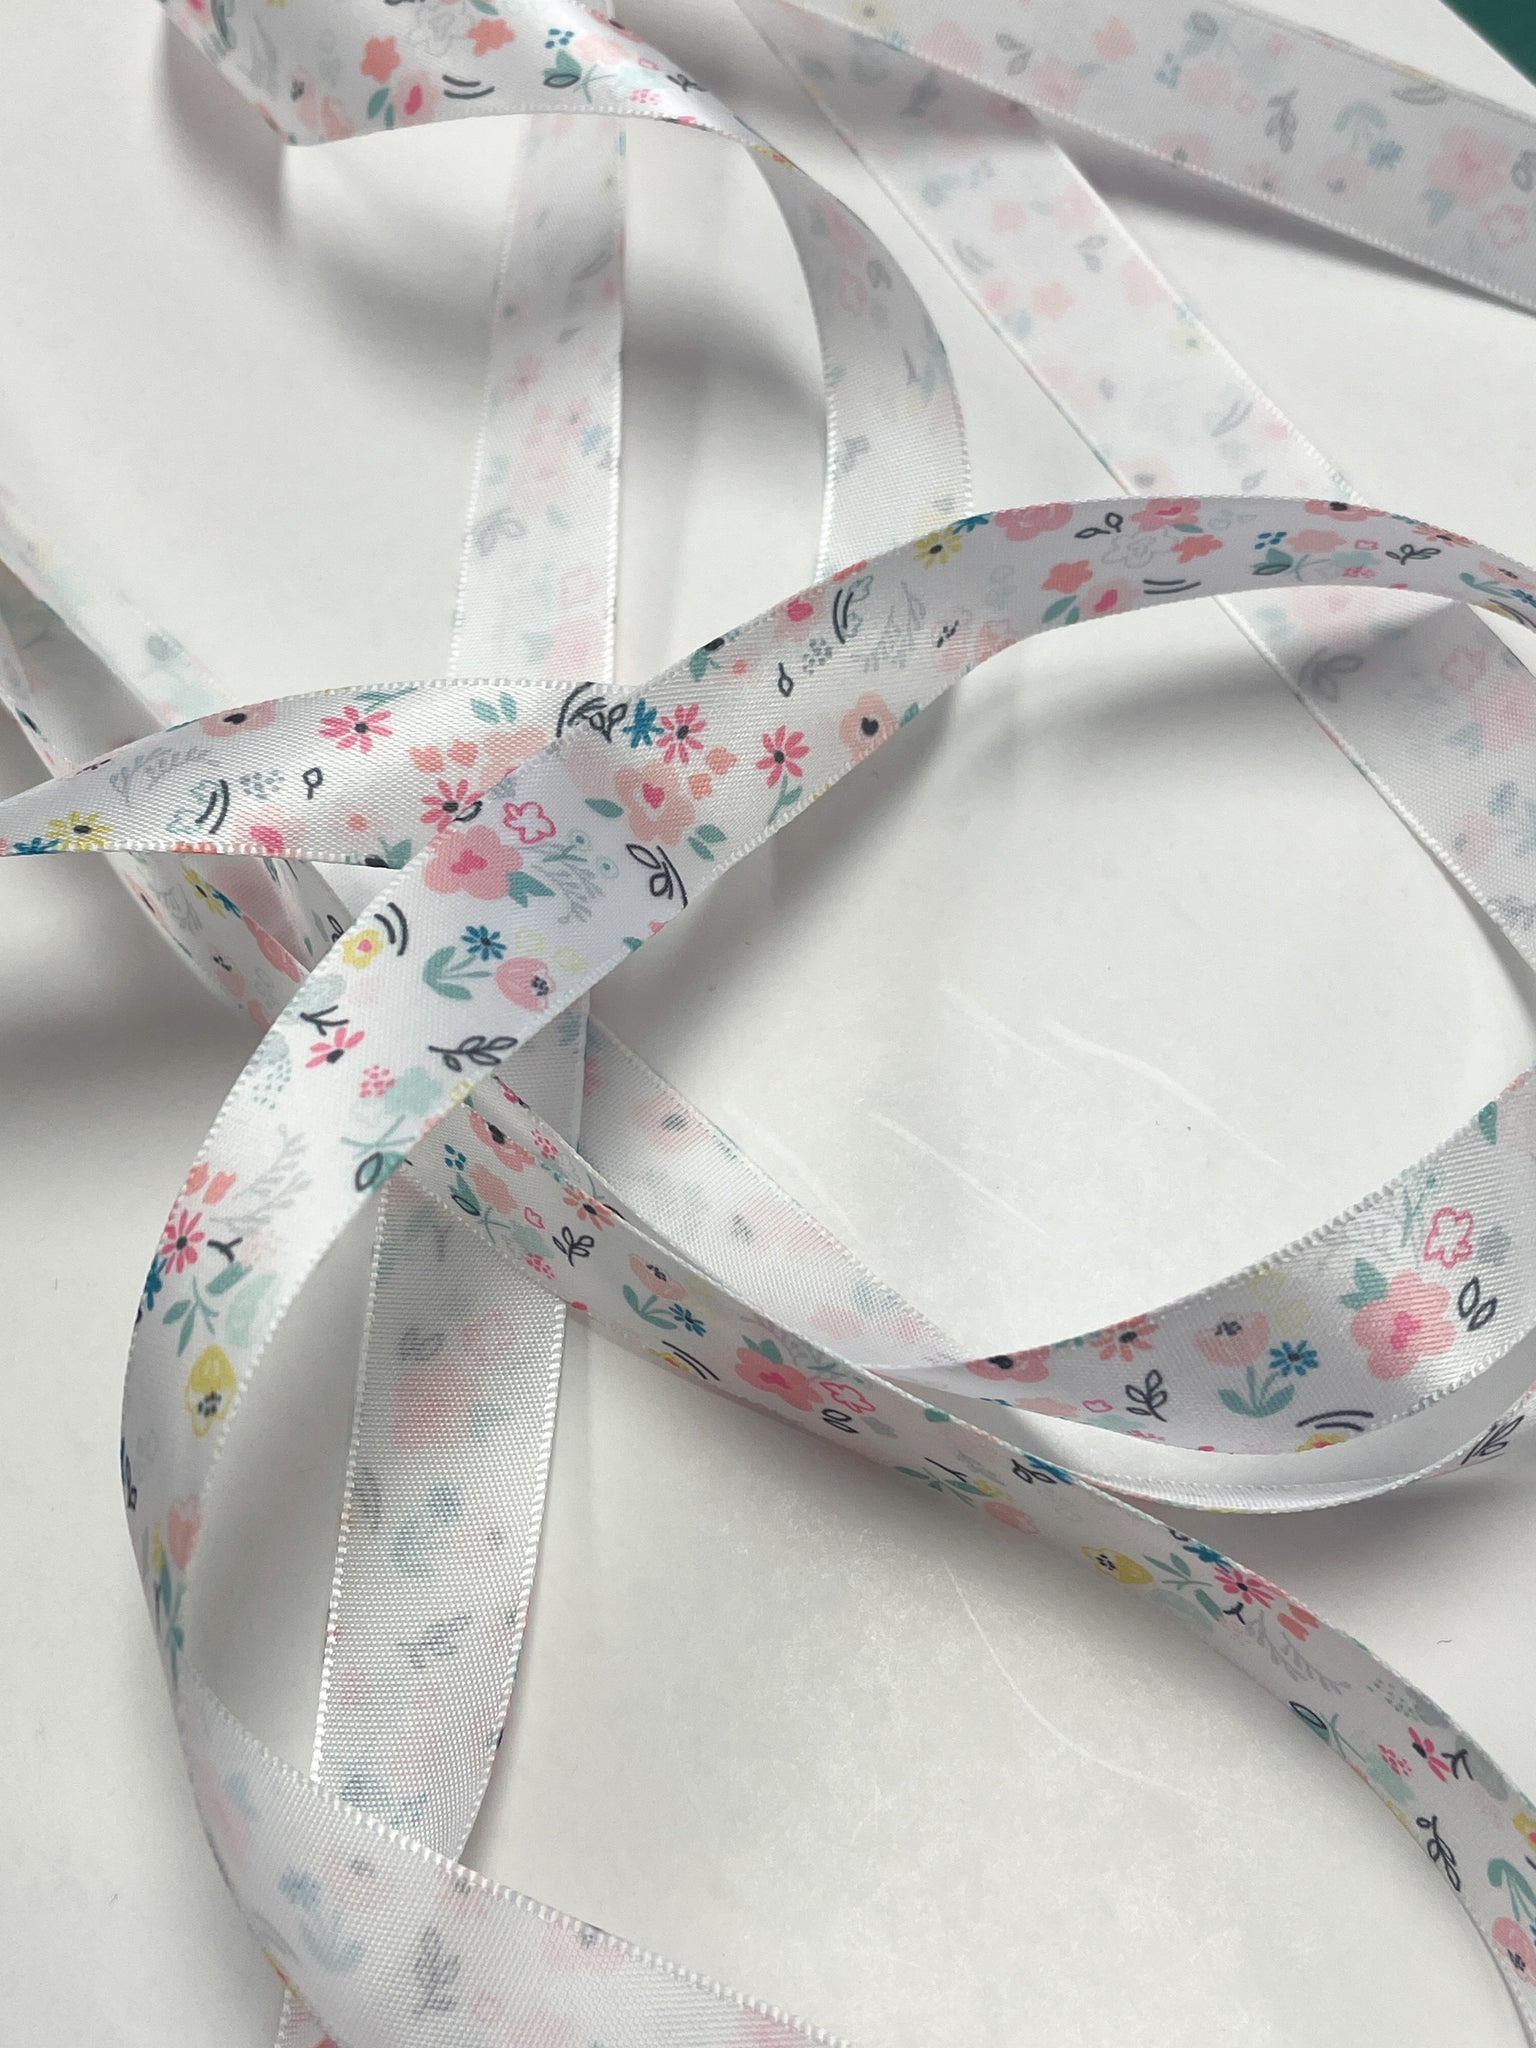 3 YD Polyester Printed Satin Ribbon - White with Pastel Flowers